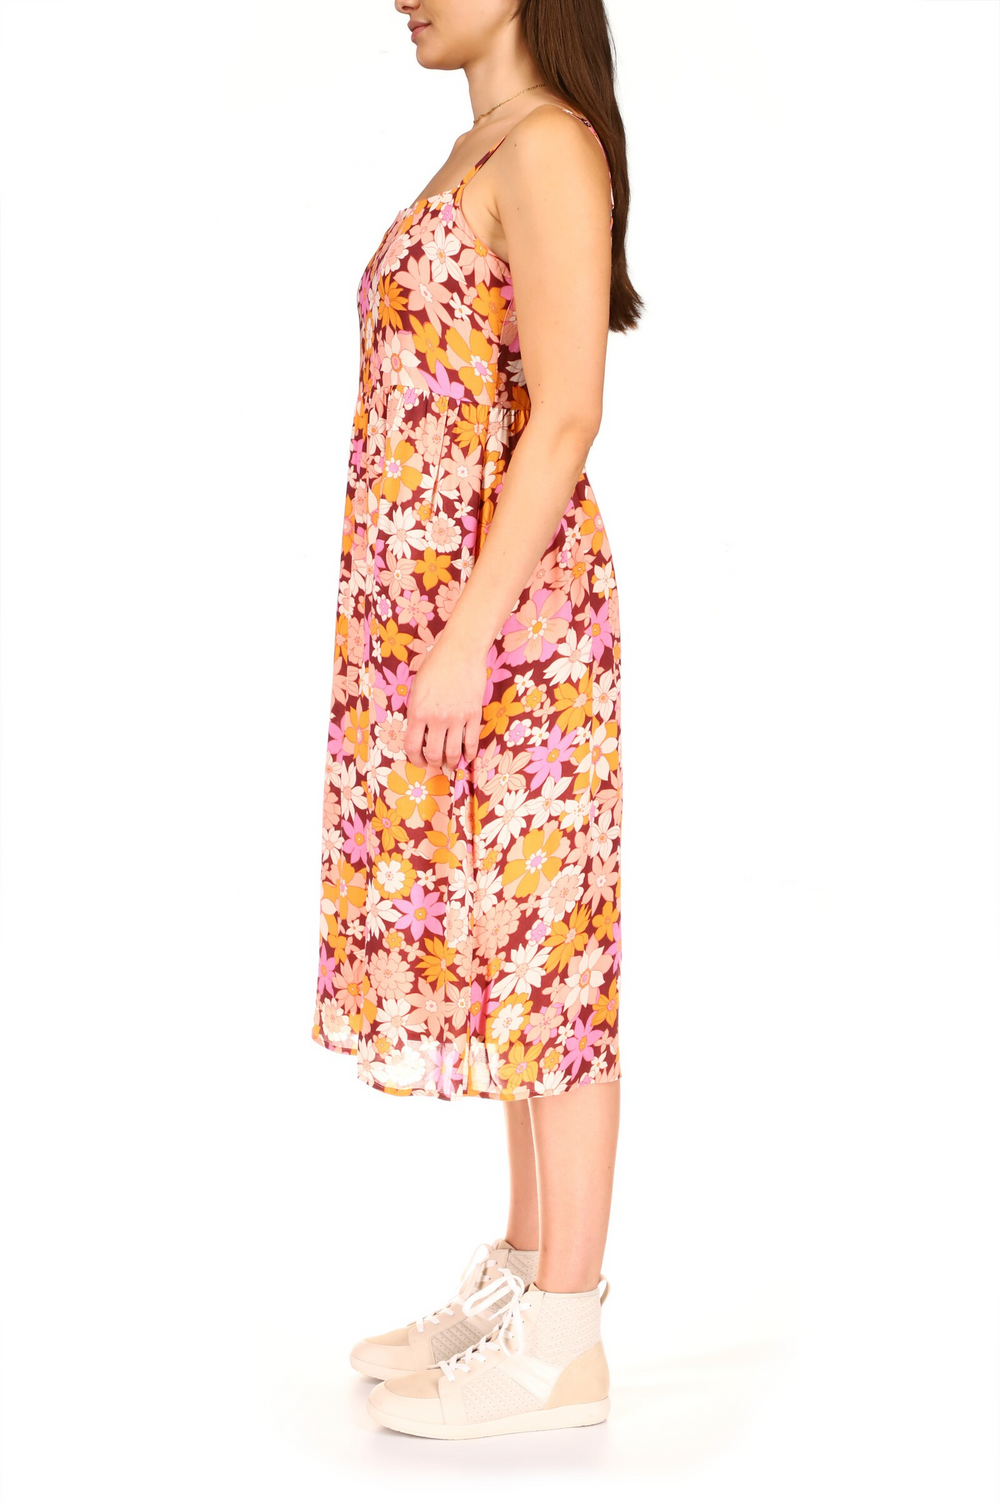 OUTDOOR FLORAL DAY IN THE PARK MIDI - Kingfisher Road - Online Boutique